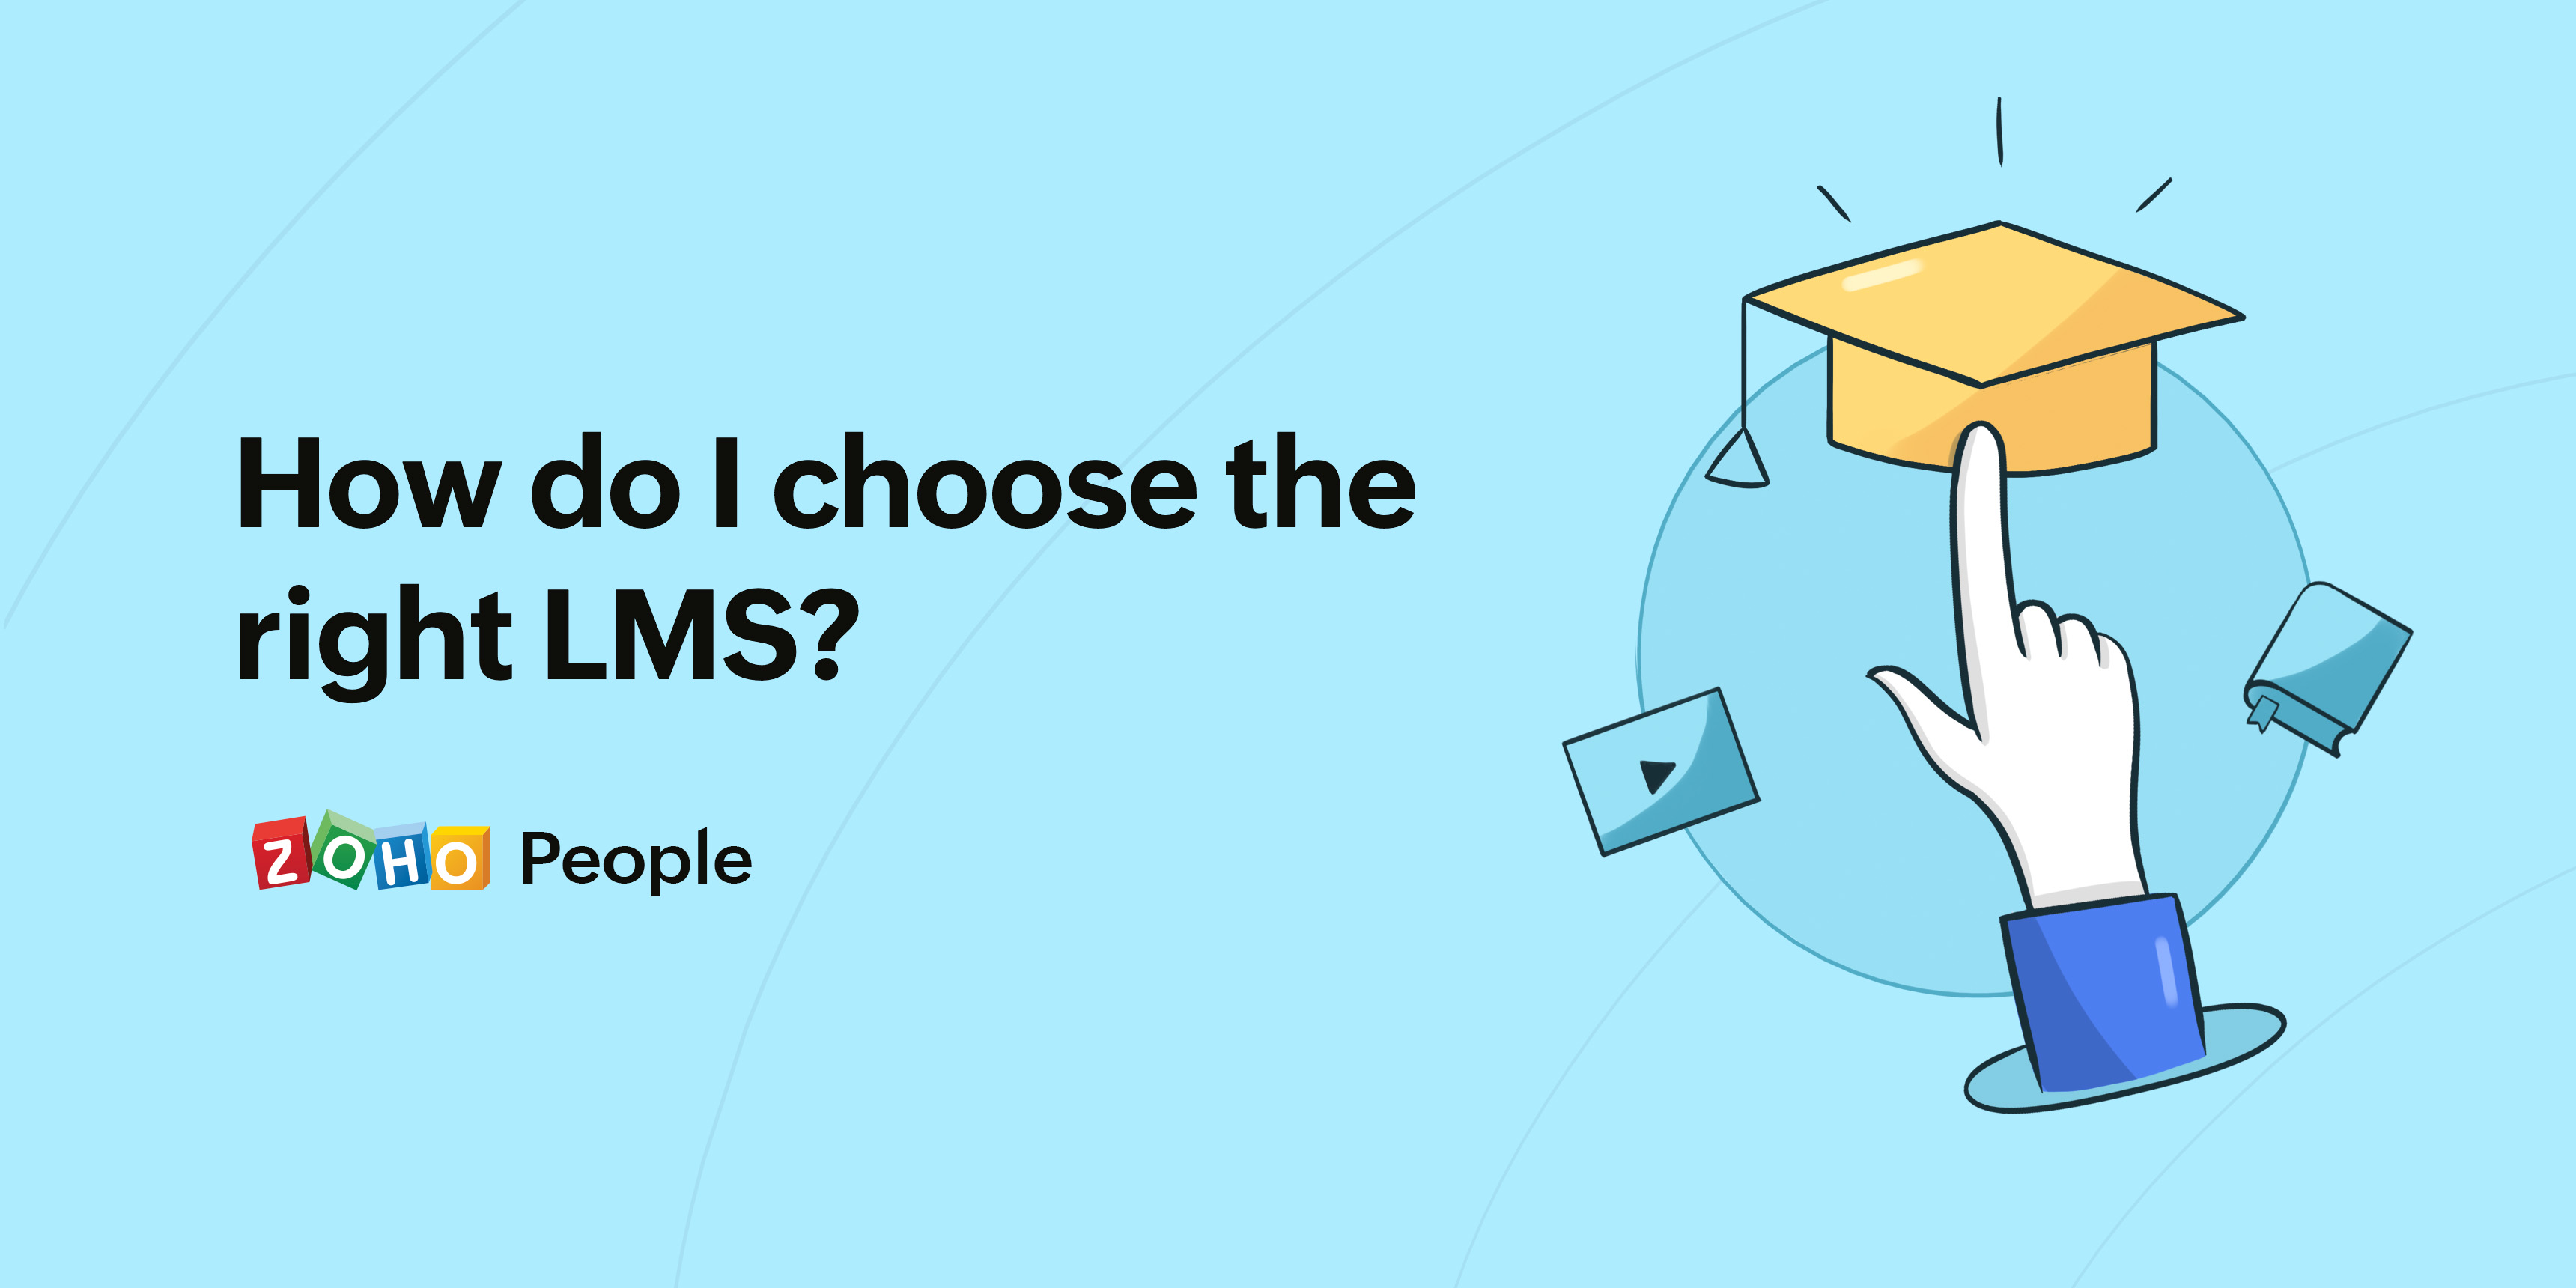 HR tech basics: 5 steps to choose the right LMS for your employees